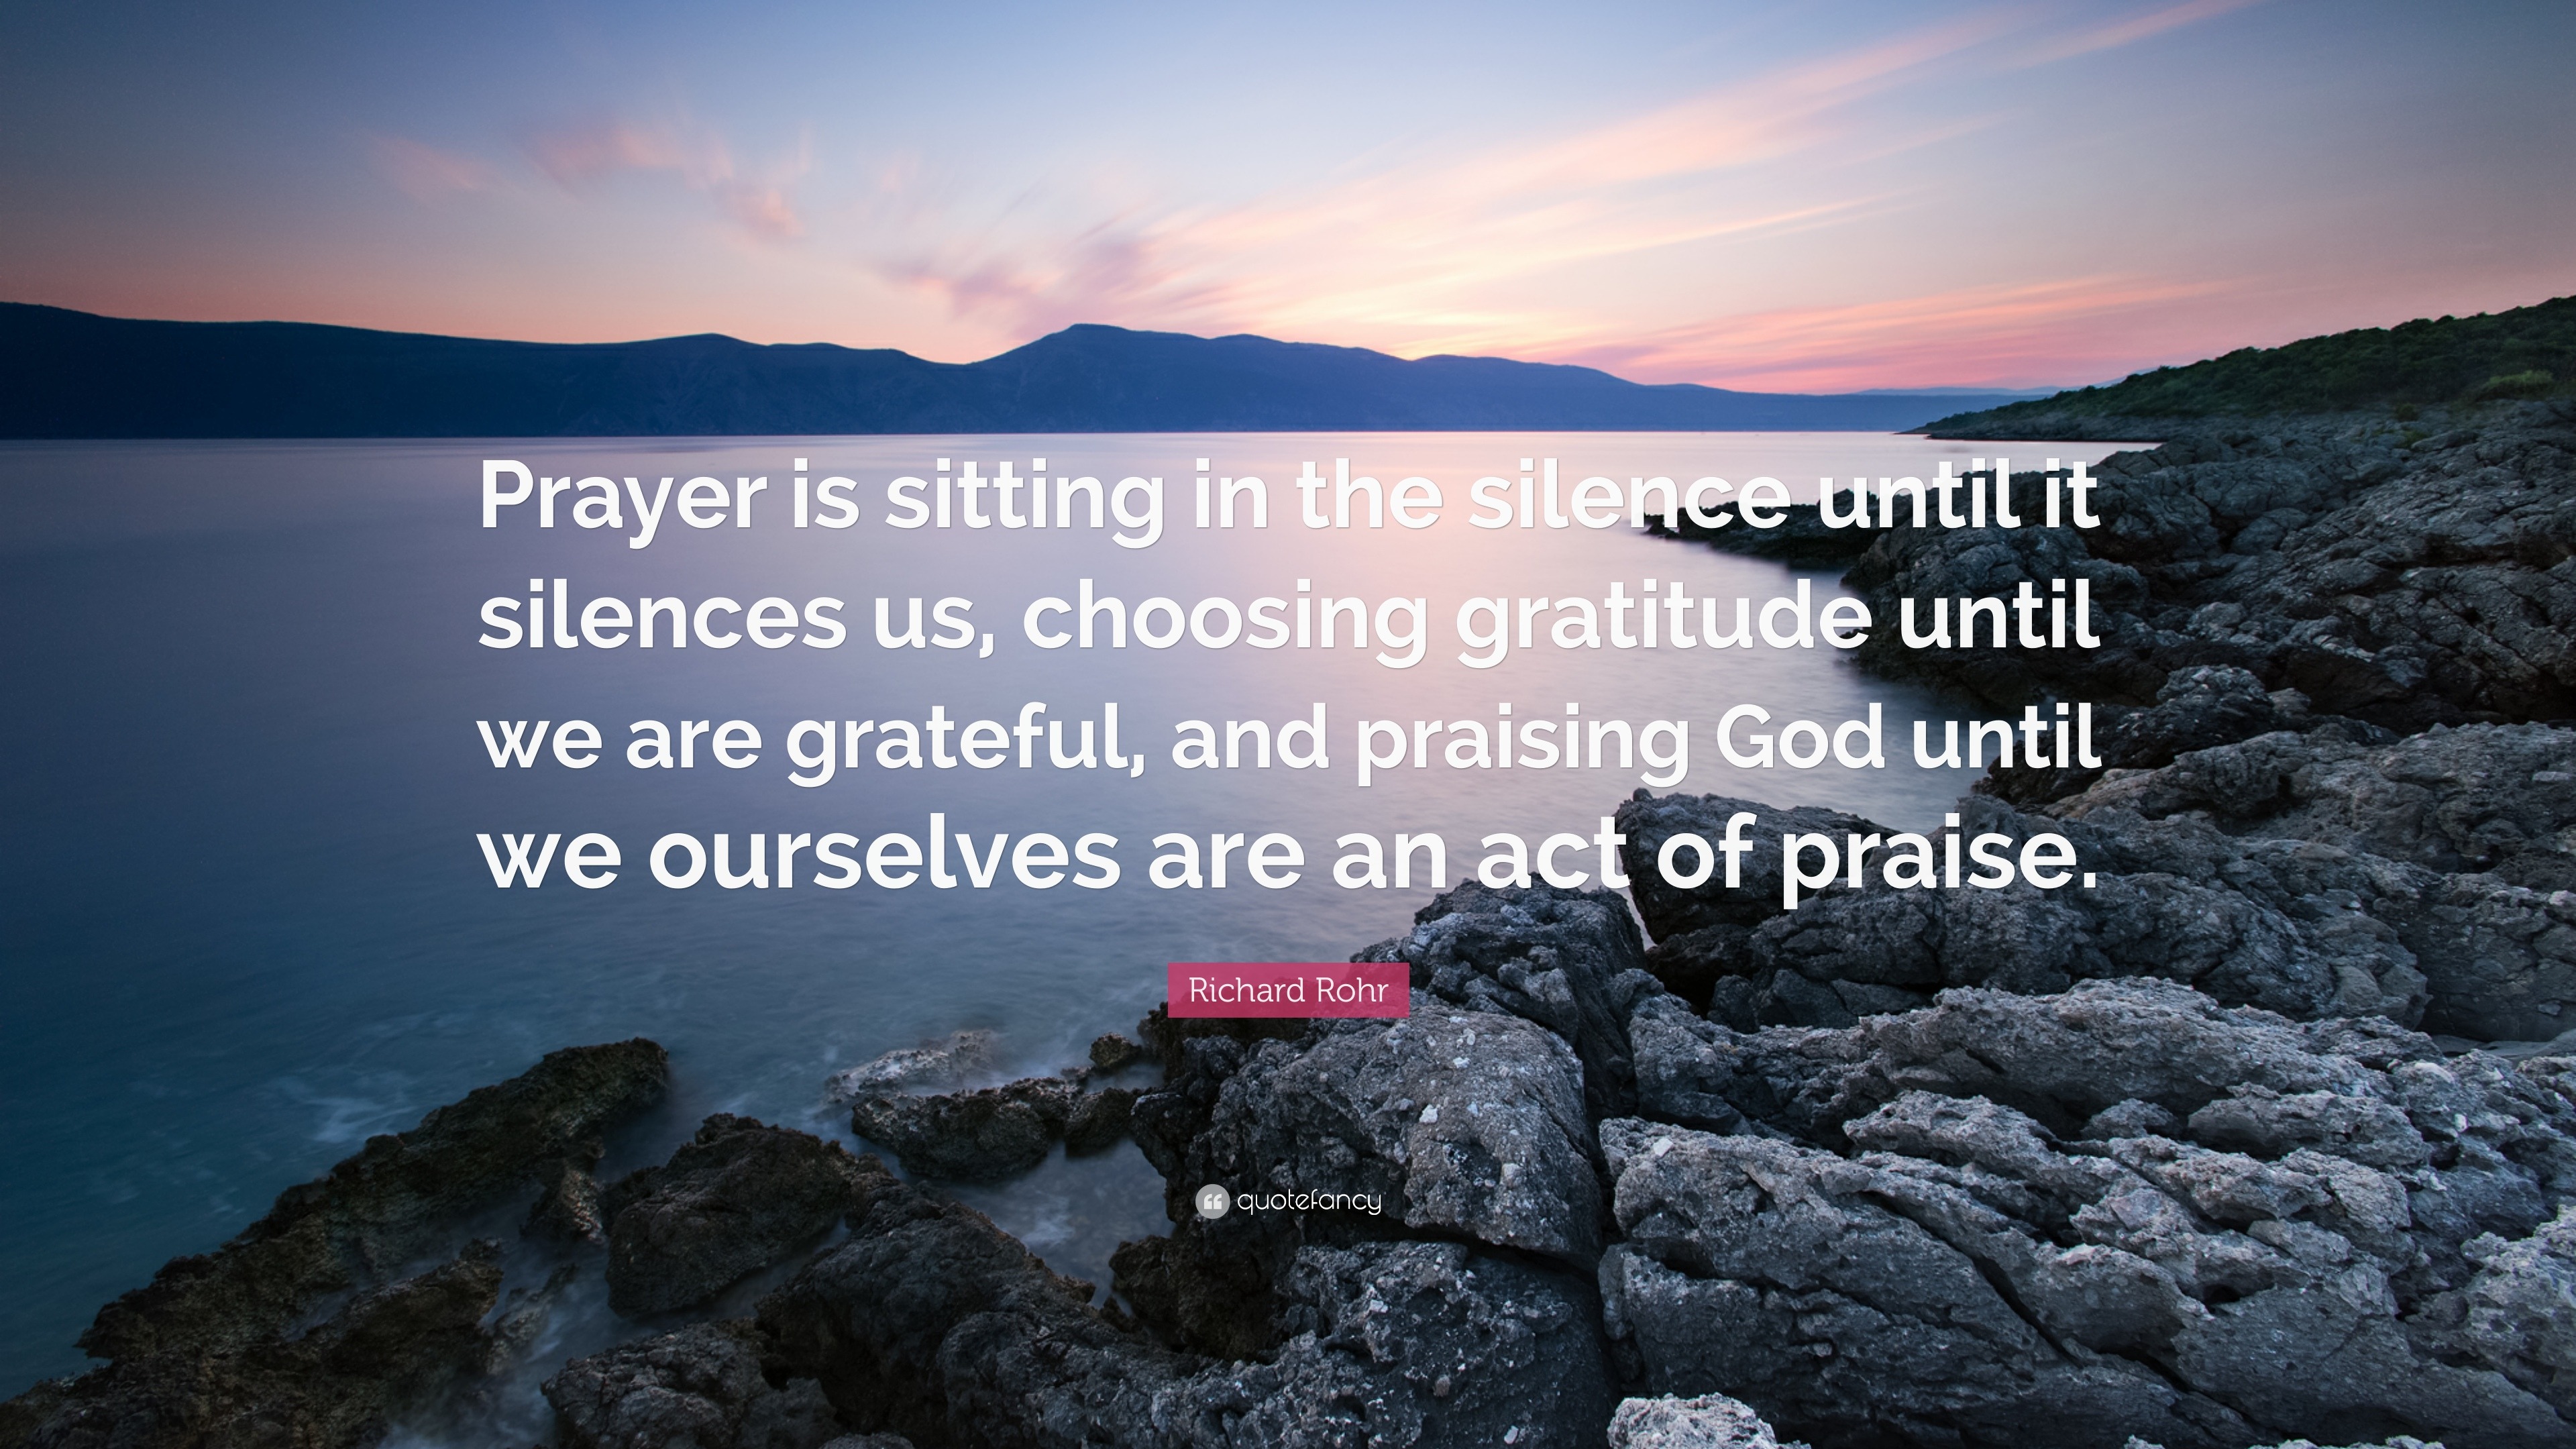 Richard Rohr Quote: “Prayer is sitting in the silence until it ...